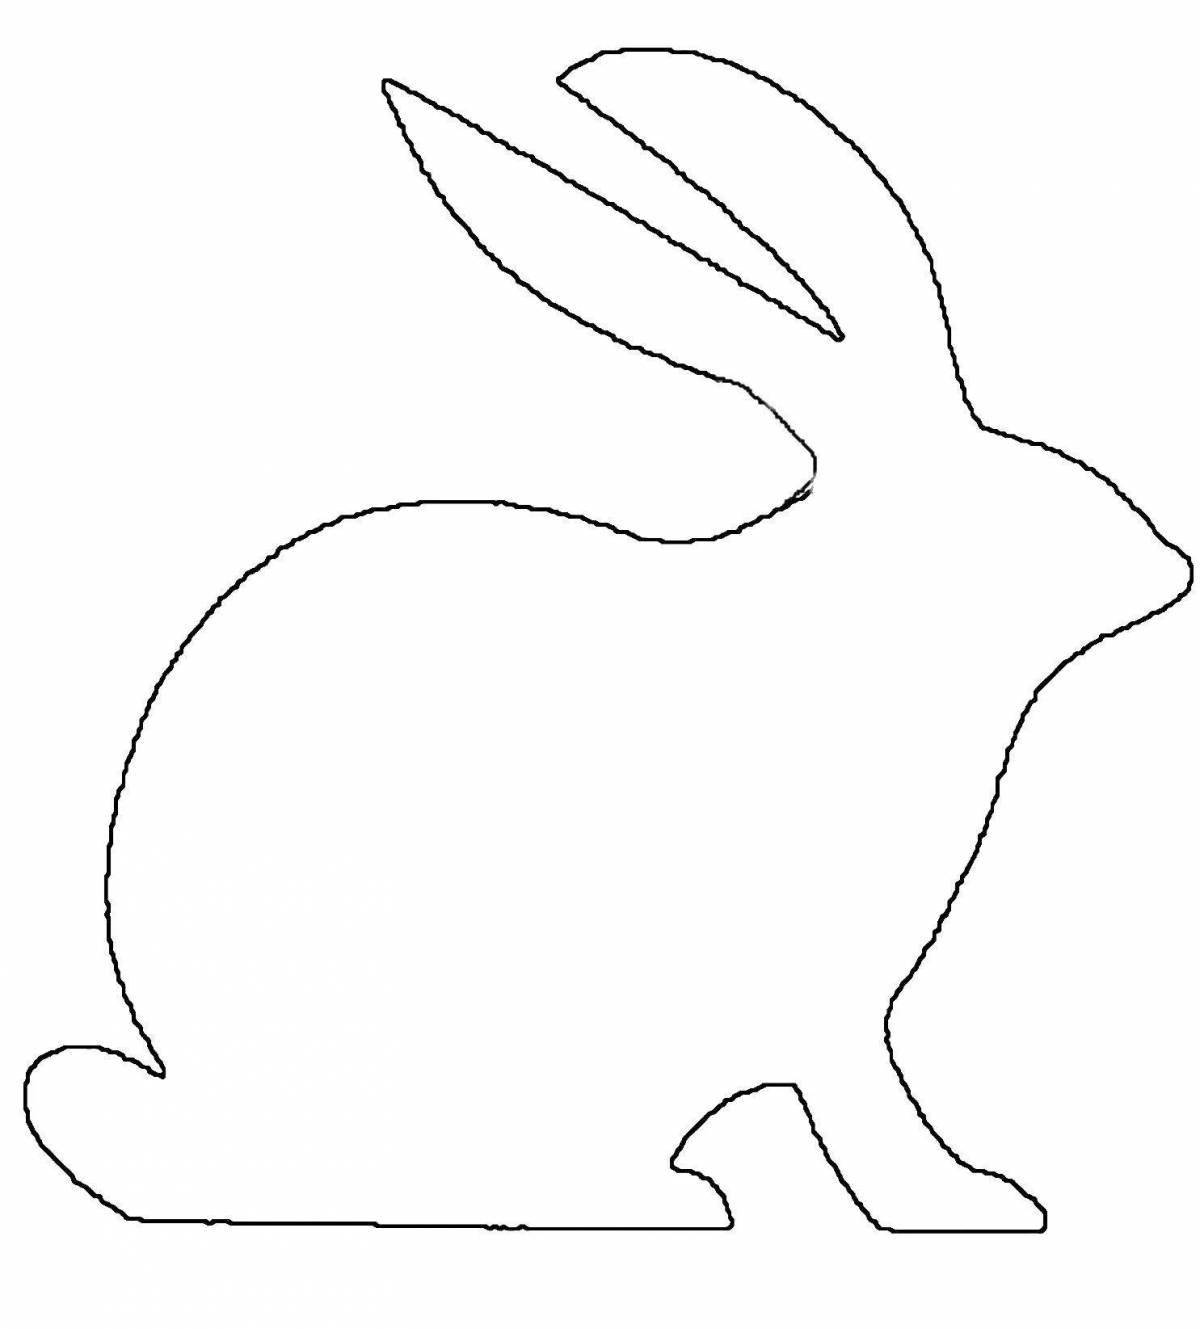 Intriguing coloring hare outline